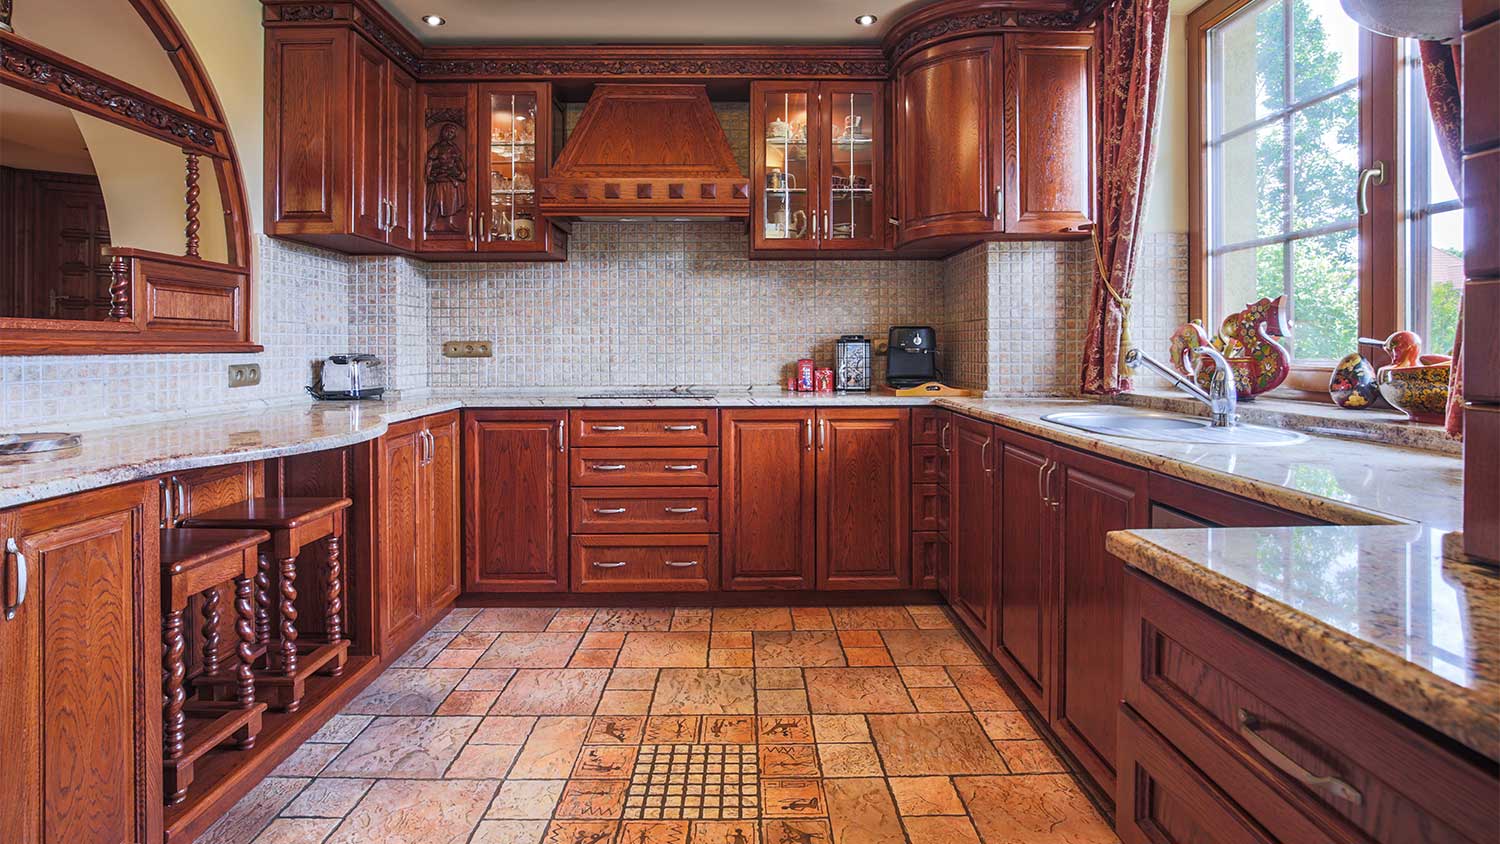 Big kitchen interior with traditional wooden cabinets